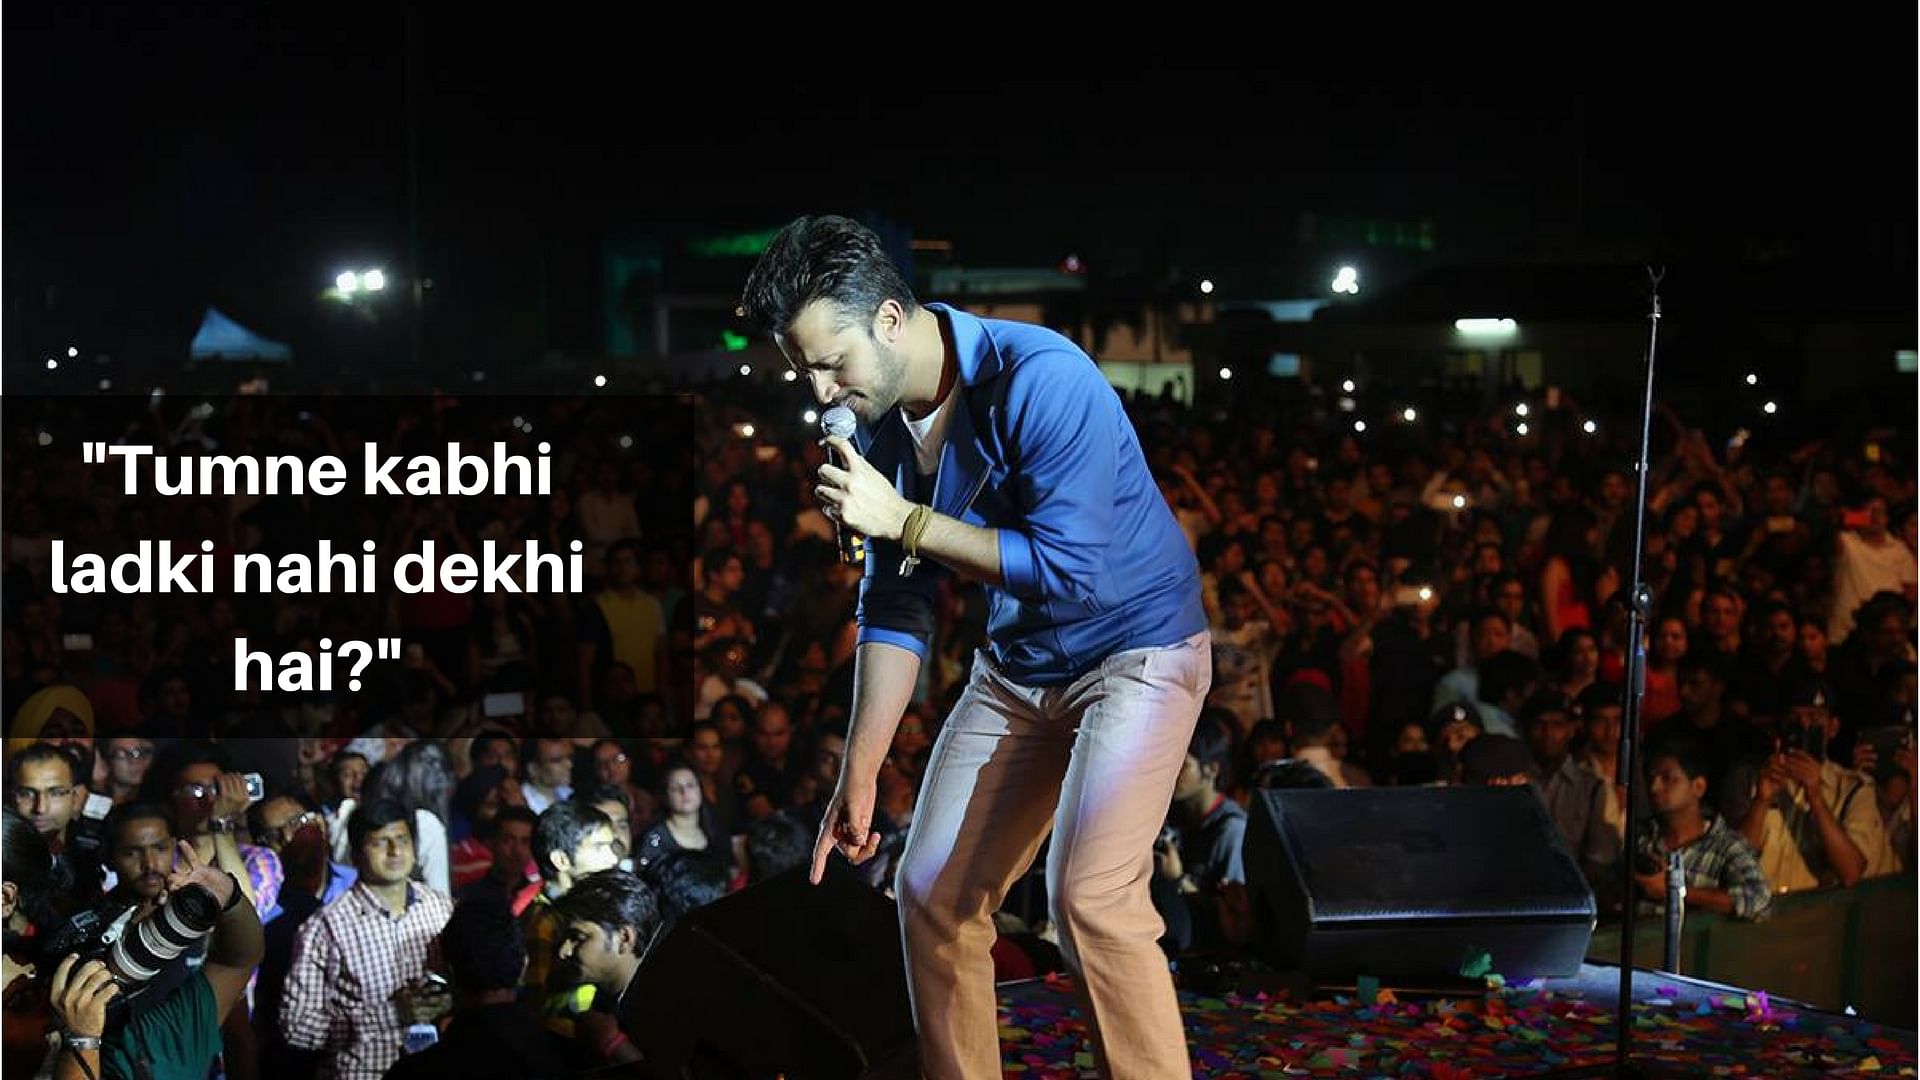 We now have another reason to love Atif Aslam. (Photo Courtesy: Facebook/<a href="https://www.facebook.com/AtifAslamOfficialFanPage/?ref=page_internal">Atif Aslam</a>)